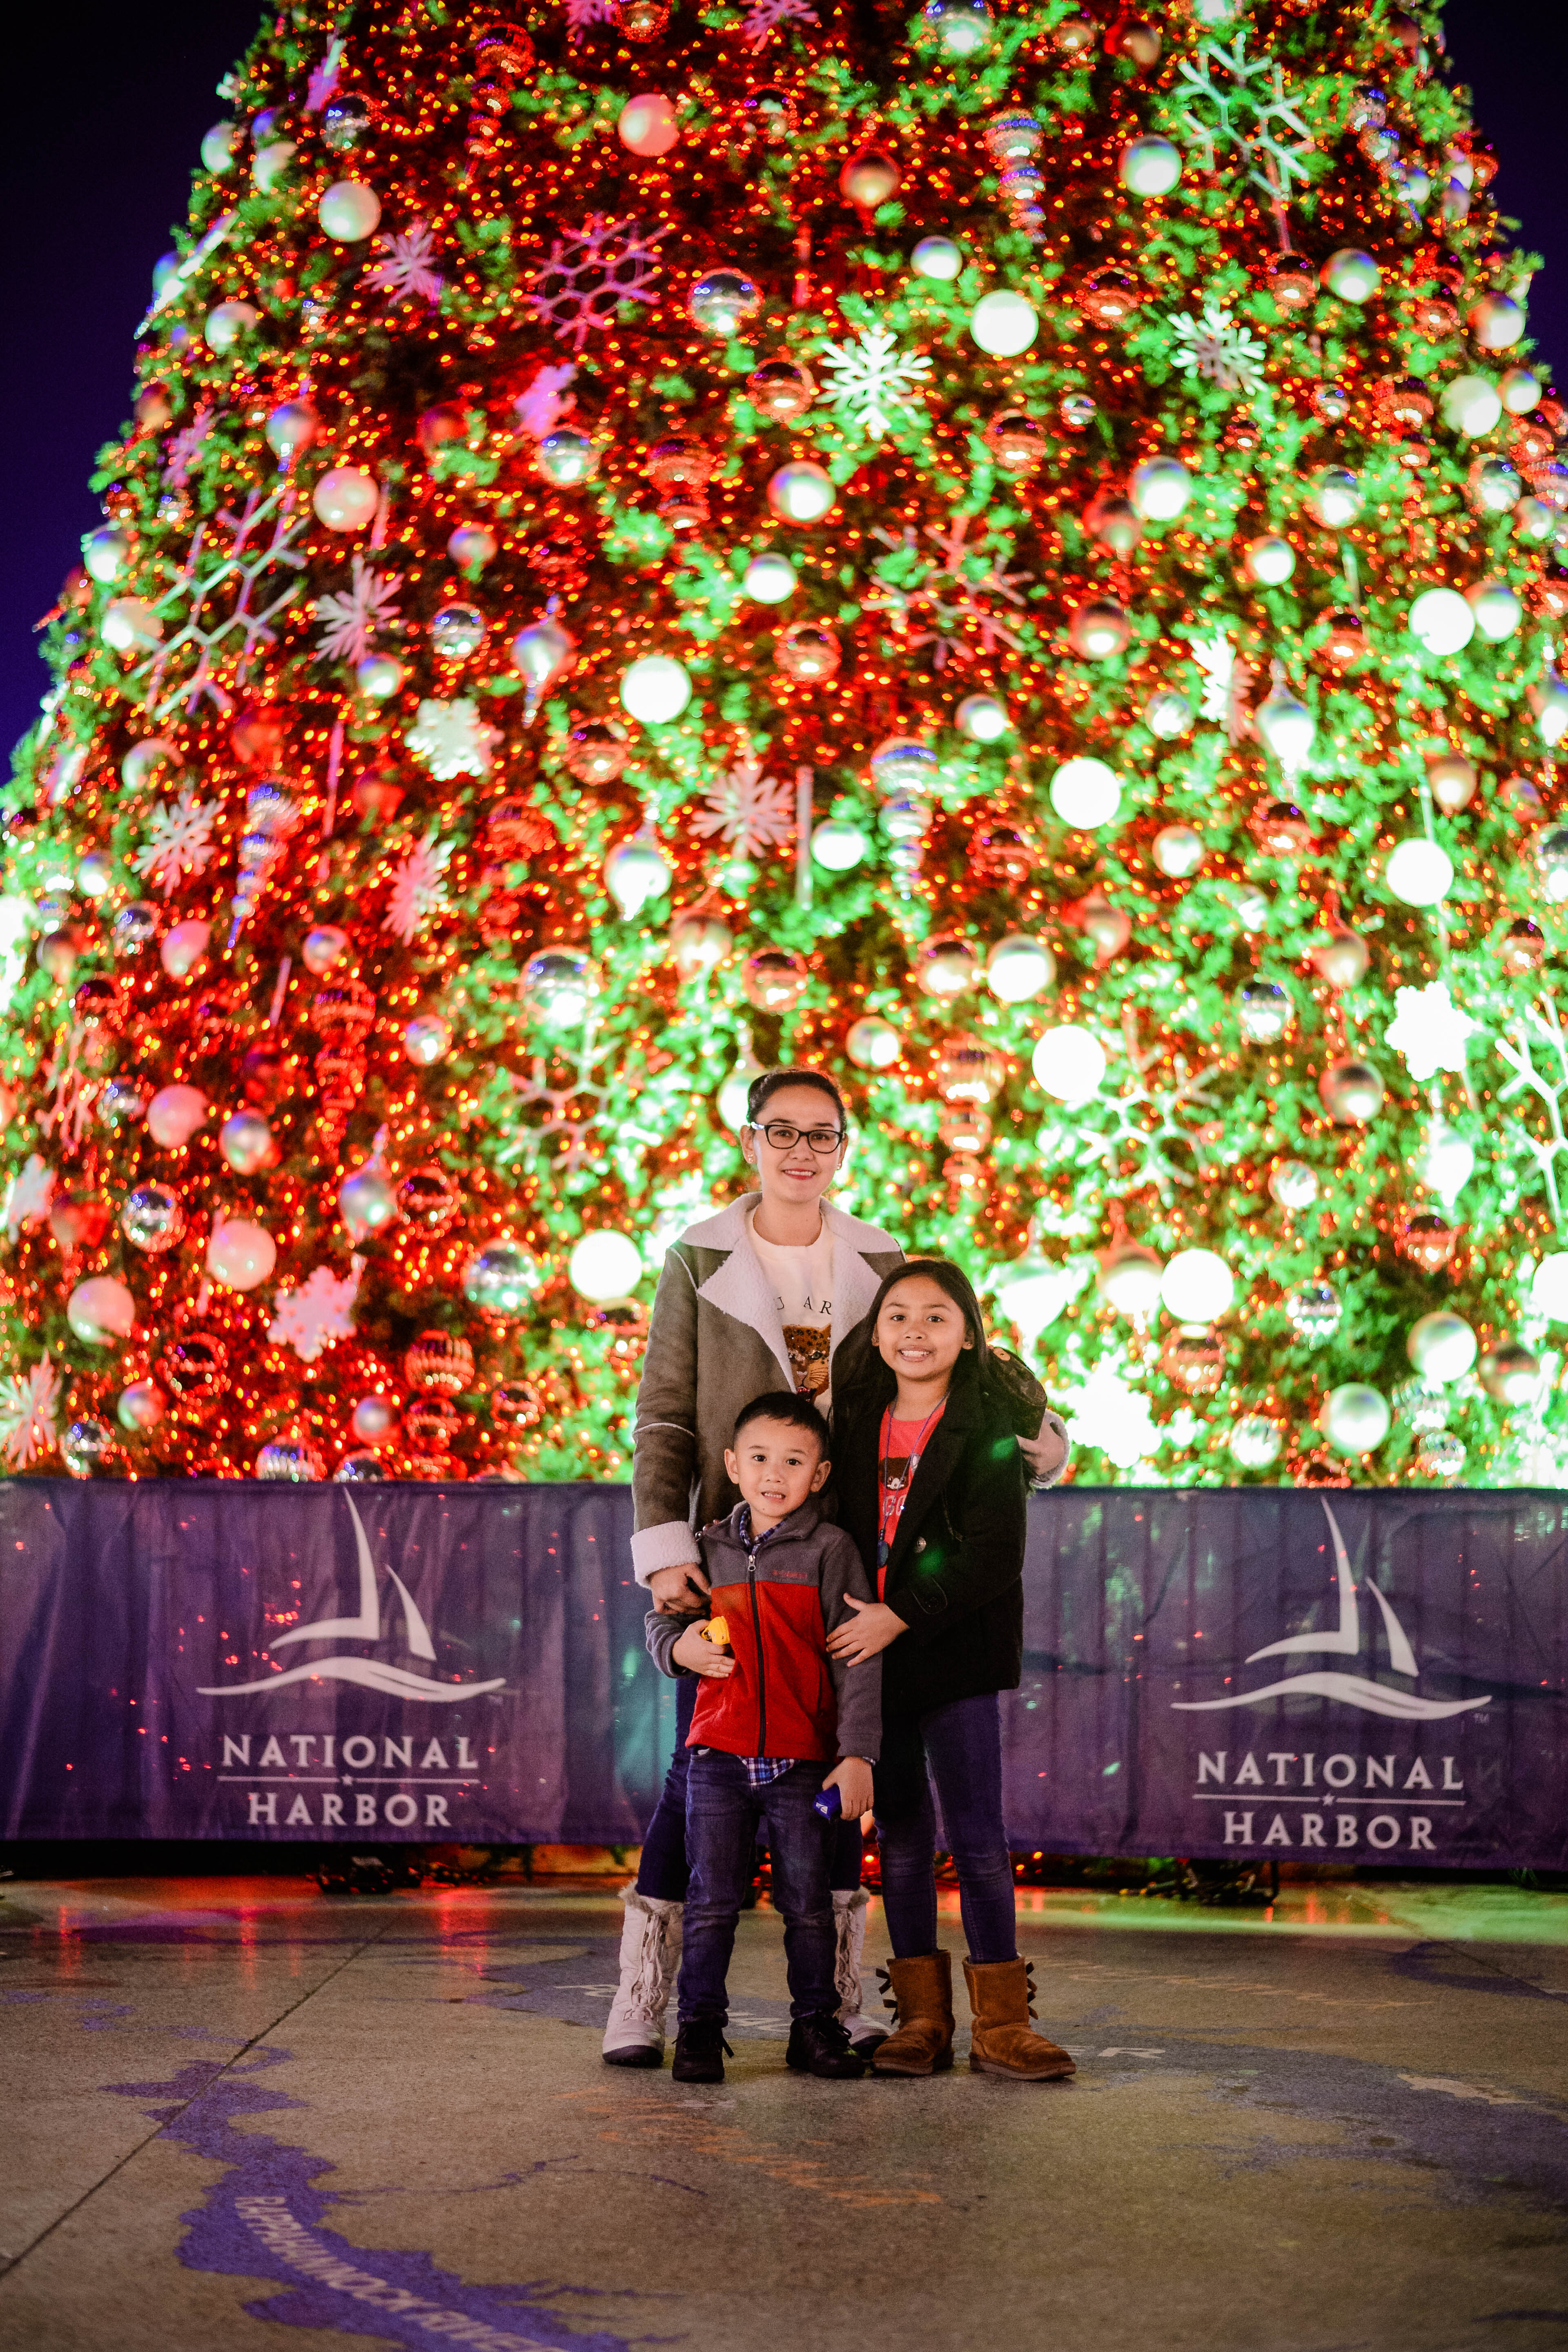 Things to Do in DC, MD, VA During the Holidays